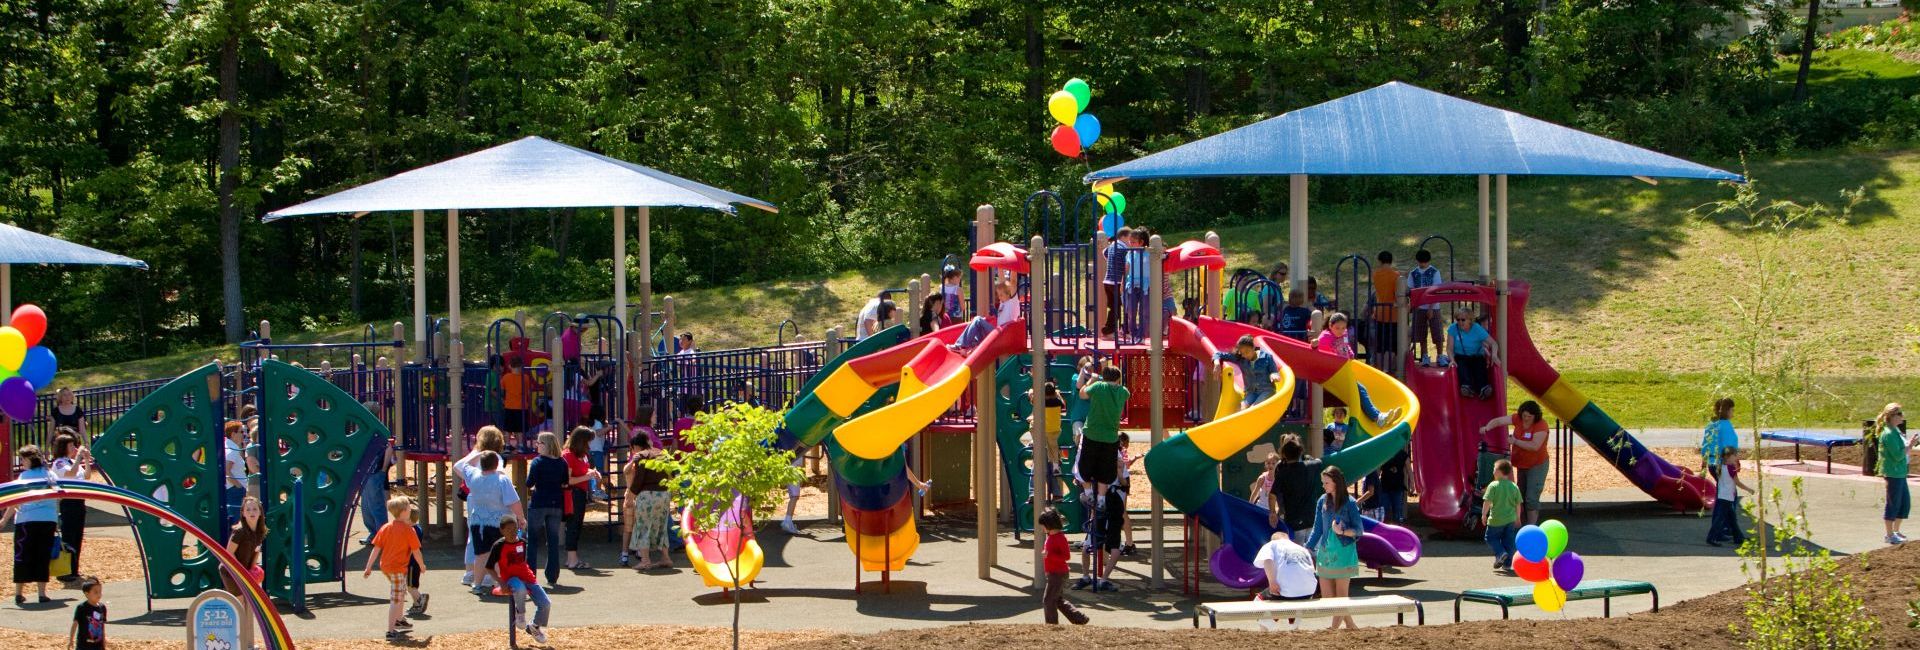 Featured image of Children playing on green, yellow, and red patterned slides at park